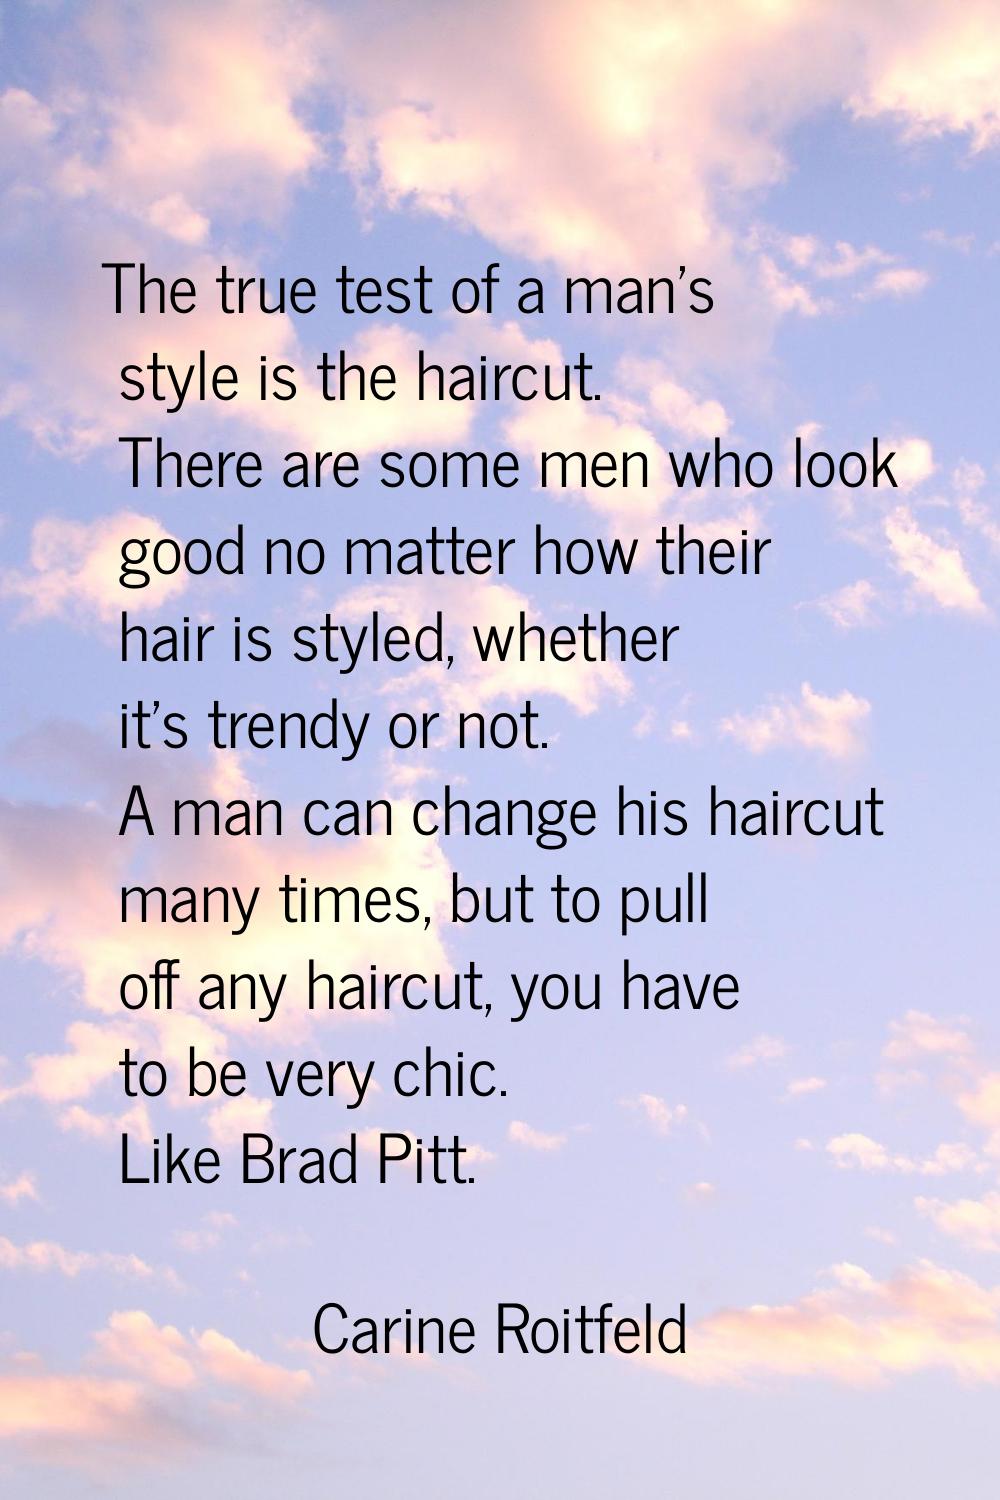 The true test of a man's style is the haircut. There are some men who look good no matter how their